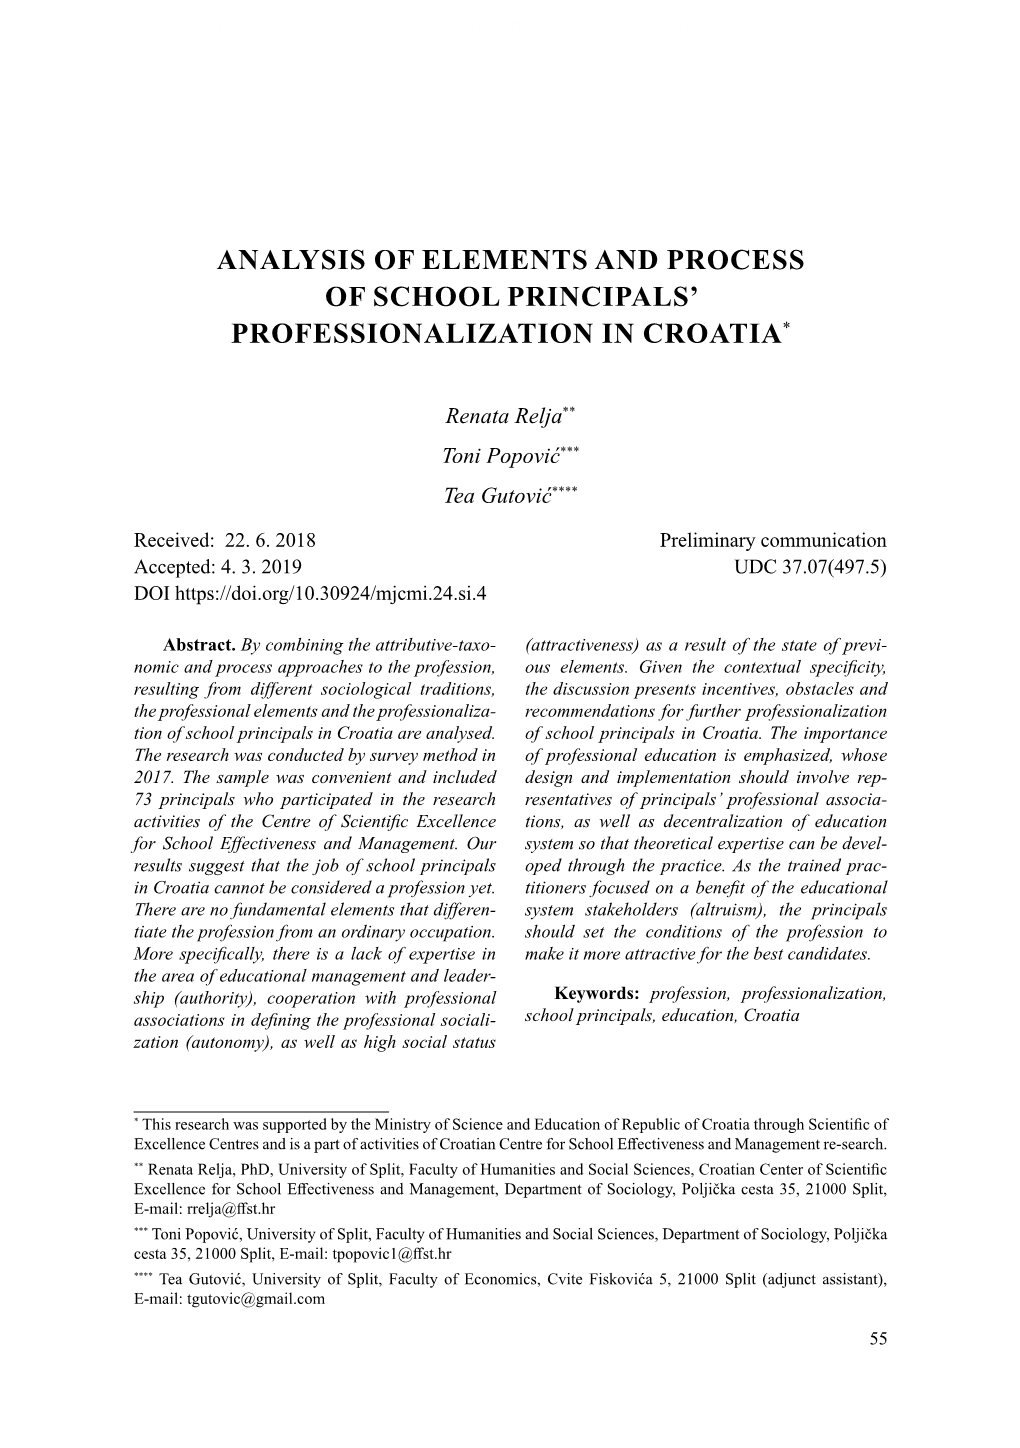 Analysis of Elements and Process of School Principals’ Professionalization in Croatia*